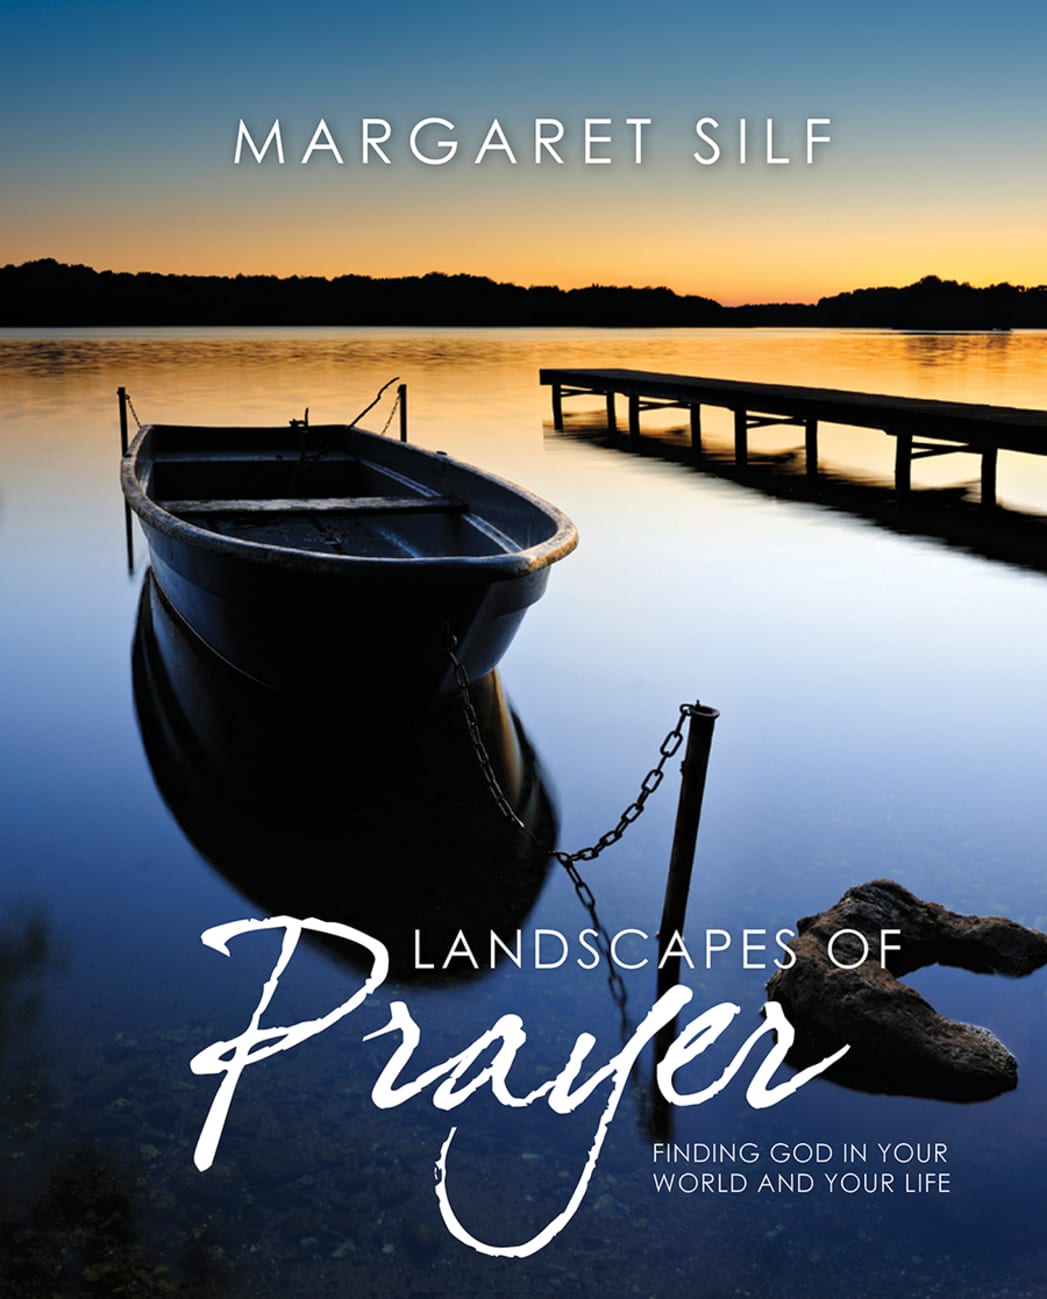 Landscapes of Prayer: Finding God in Your World and Your Life Hardback